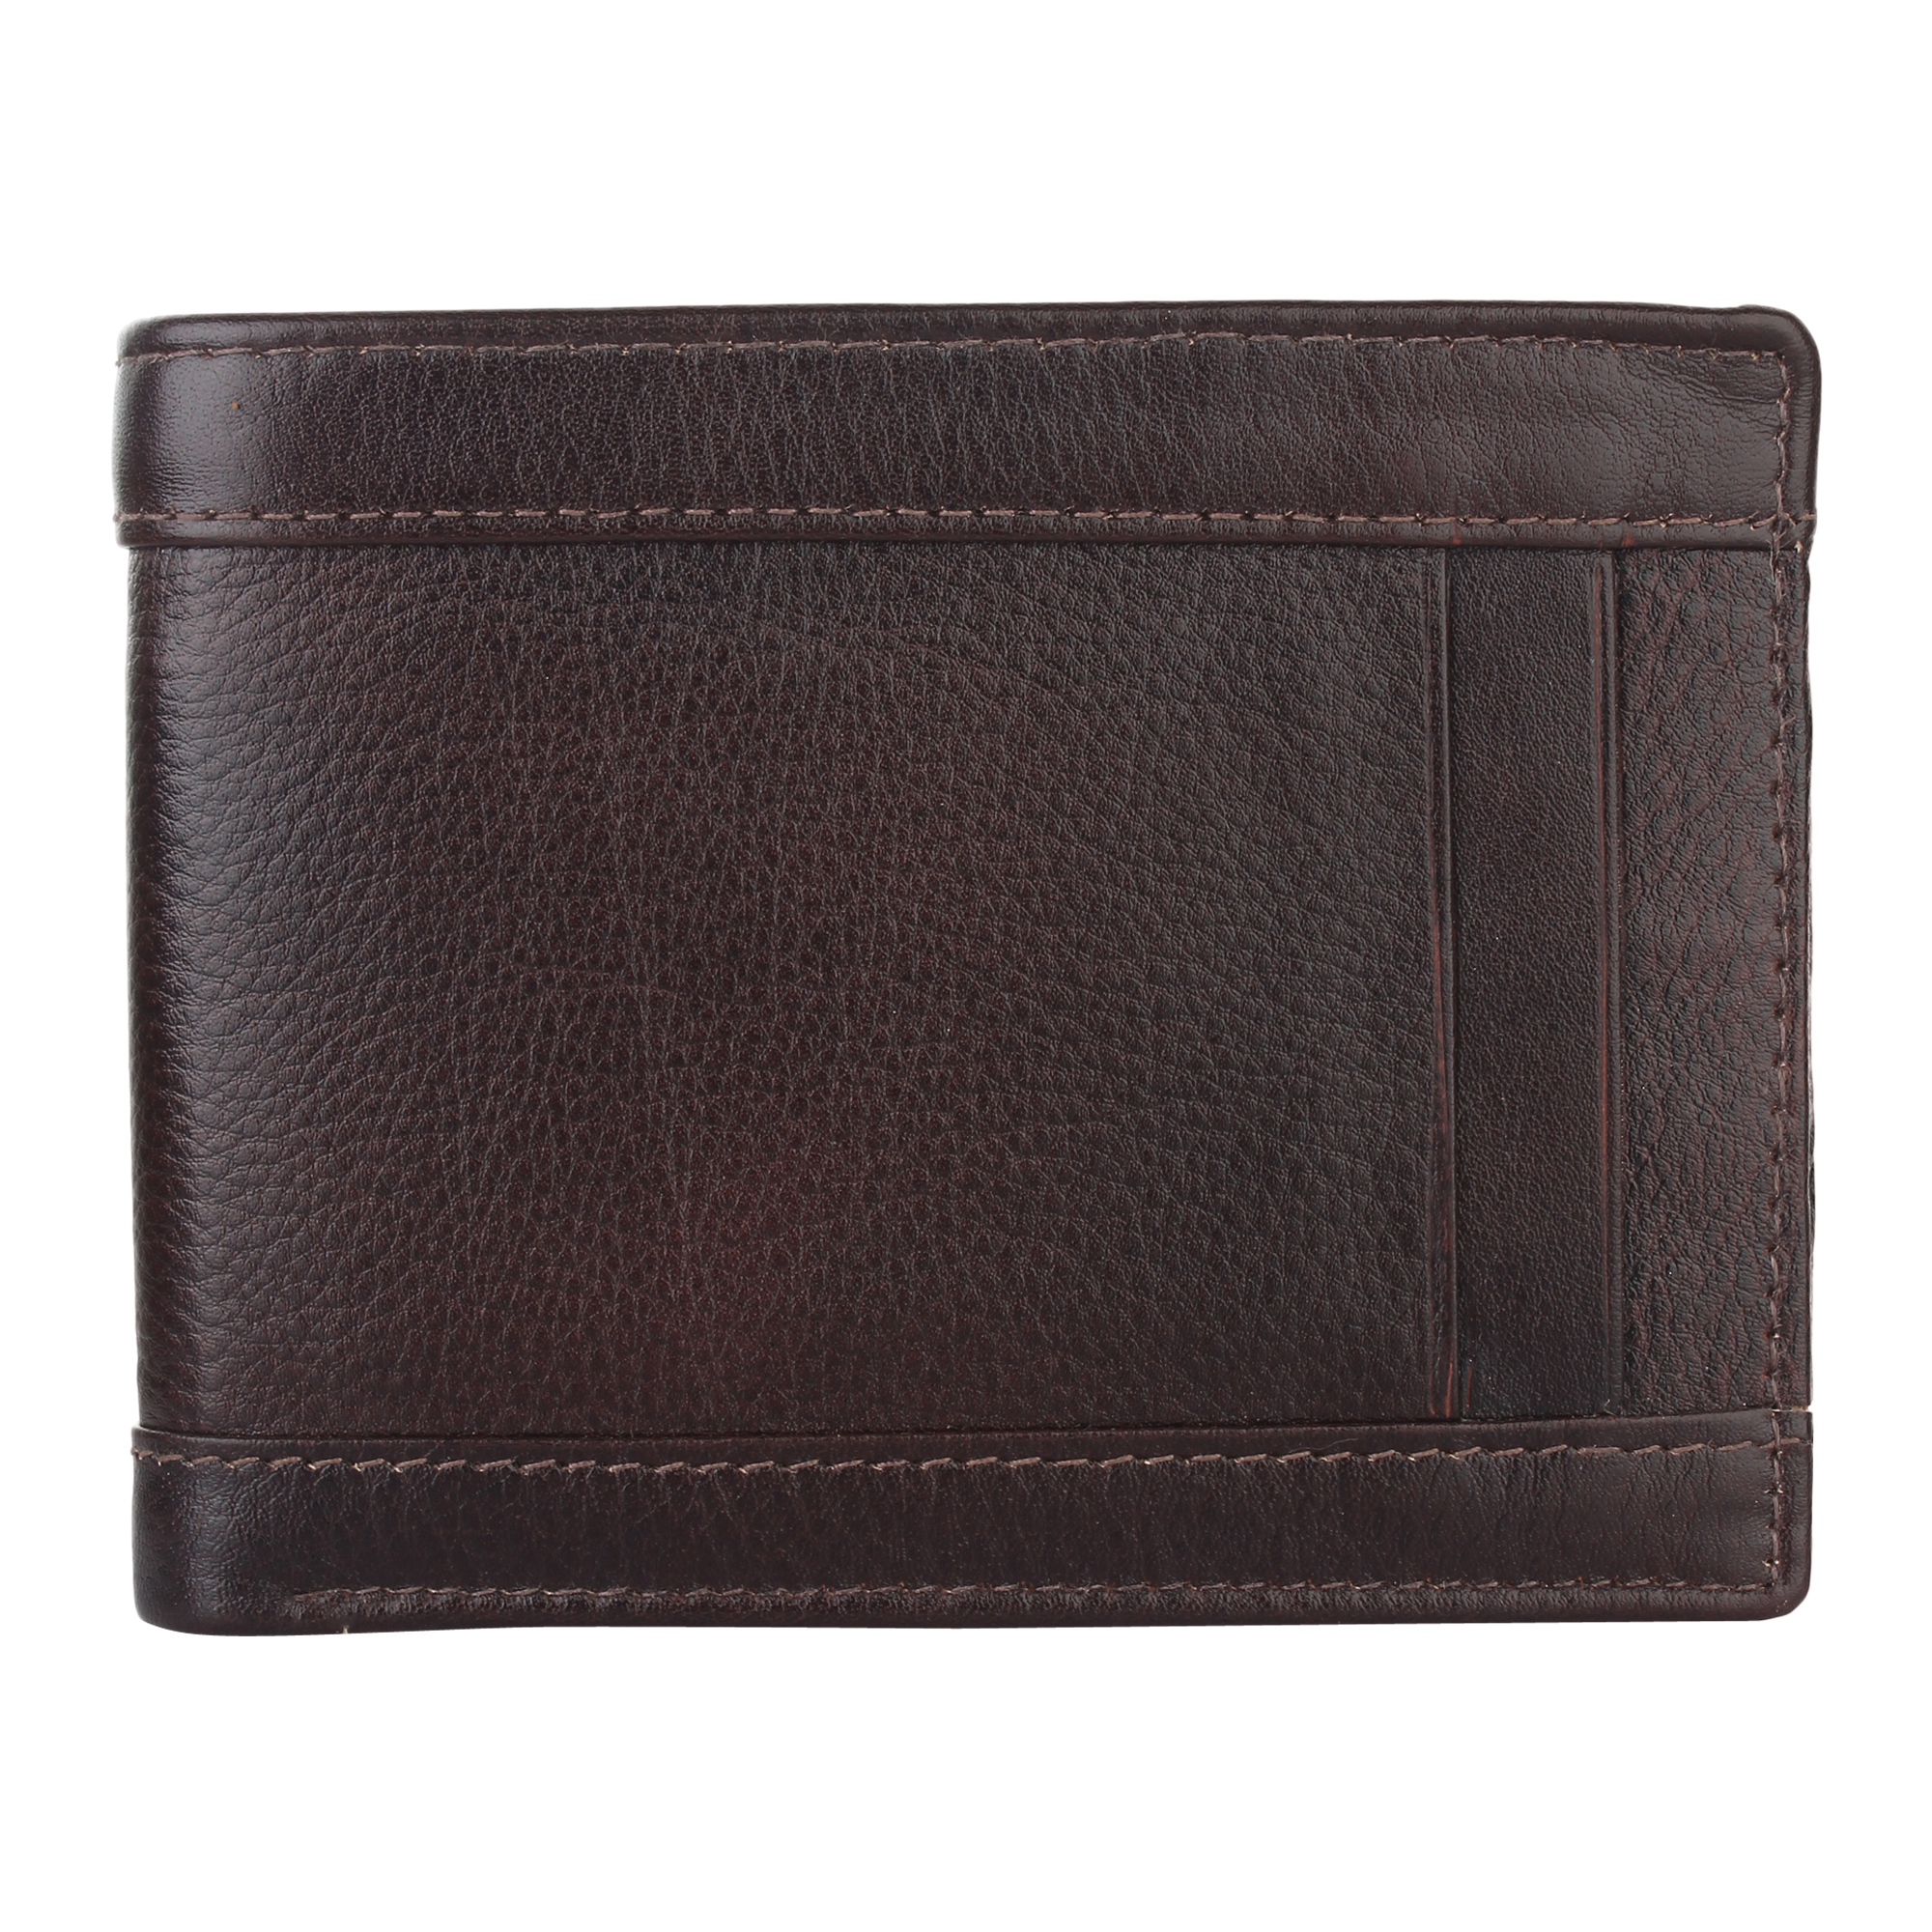 Leather Wallets Manufacturers in Mexico, Leather Wallets Suppliers in Mexico, Leather Wallets Wholesalers in Mexico, Leather Wallets Traders in Mexico, custom leather wallet manufacturers in Mexico, Leathe